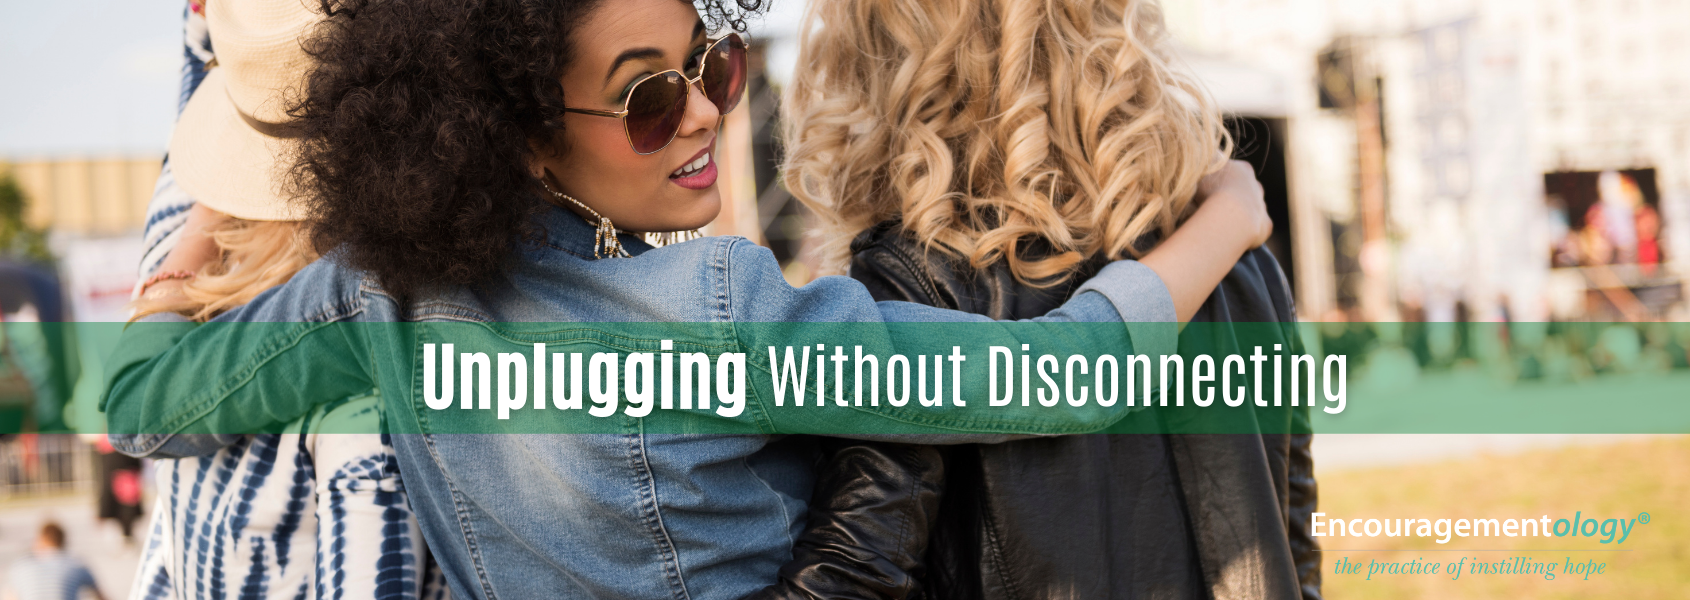 Unplugging without disconnecting